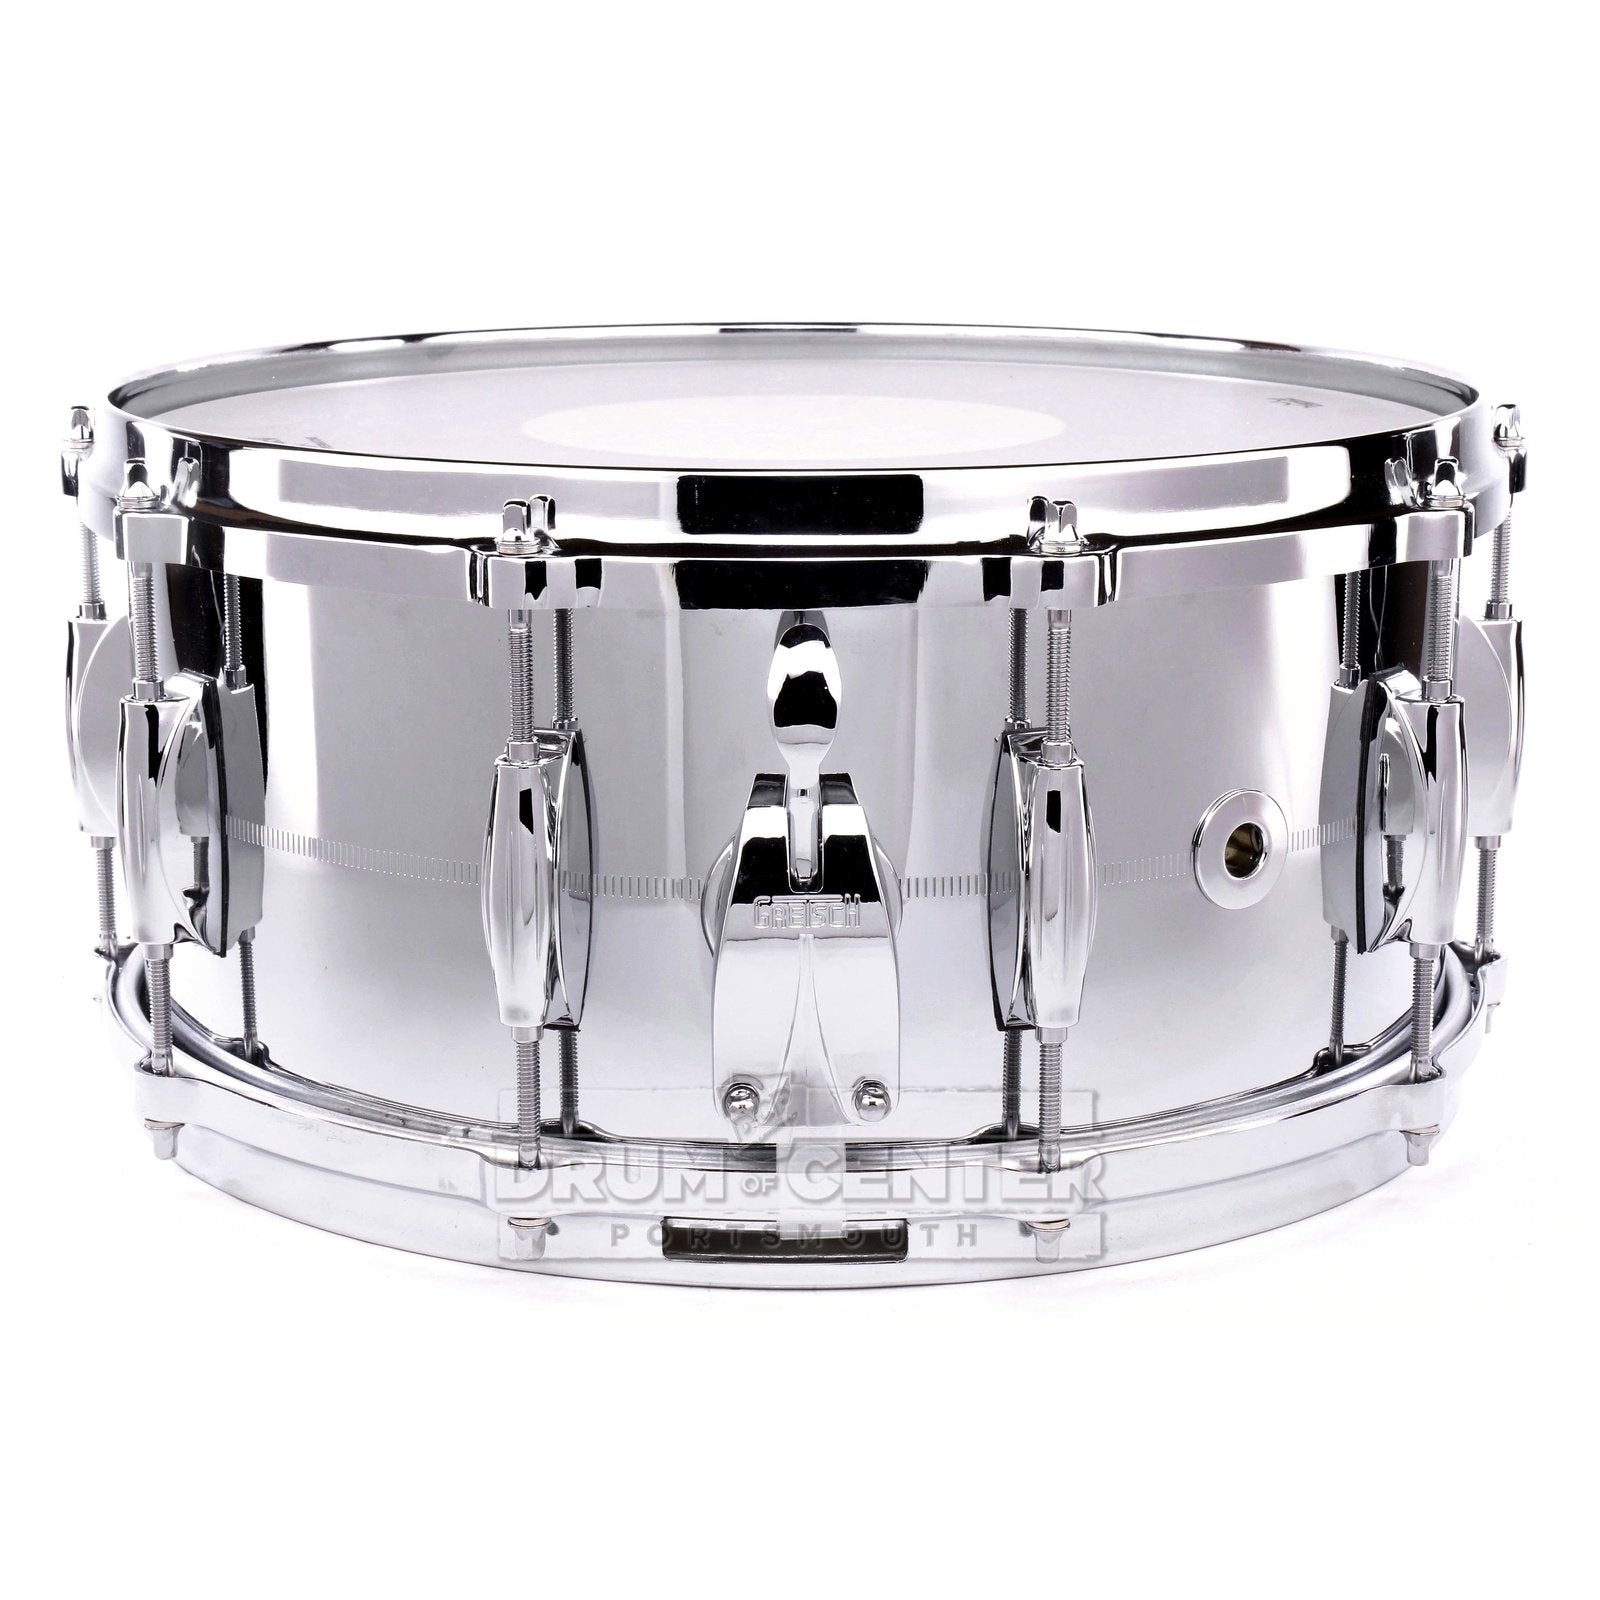 Gretsch Classic 4160 Hammered Chrome Over Brass Snare Drum - 14x5